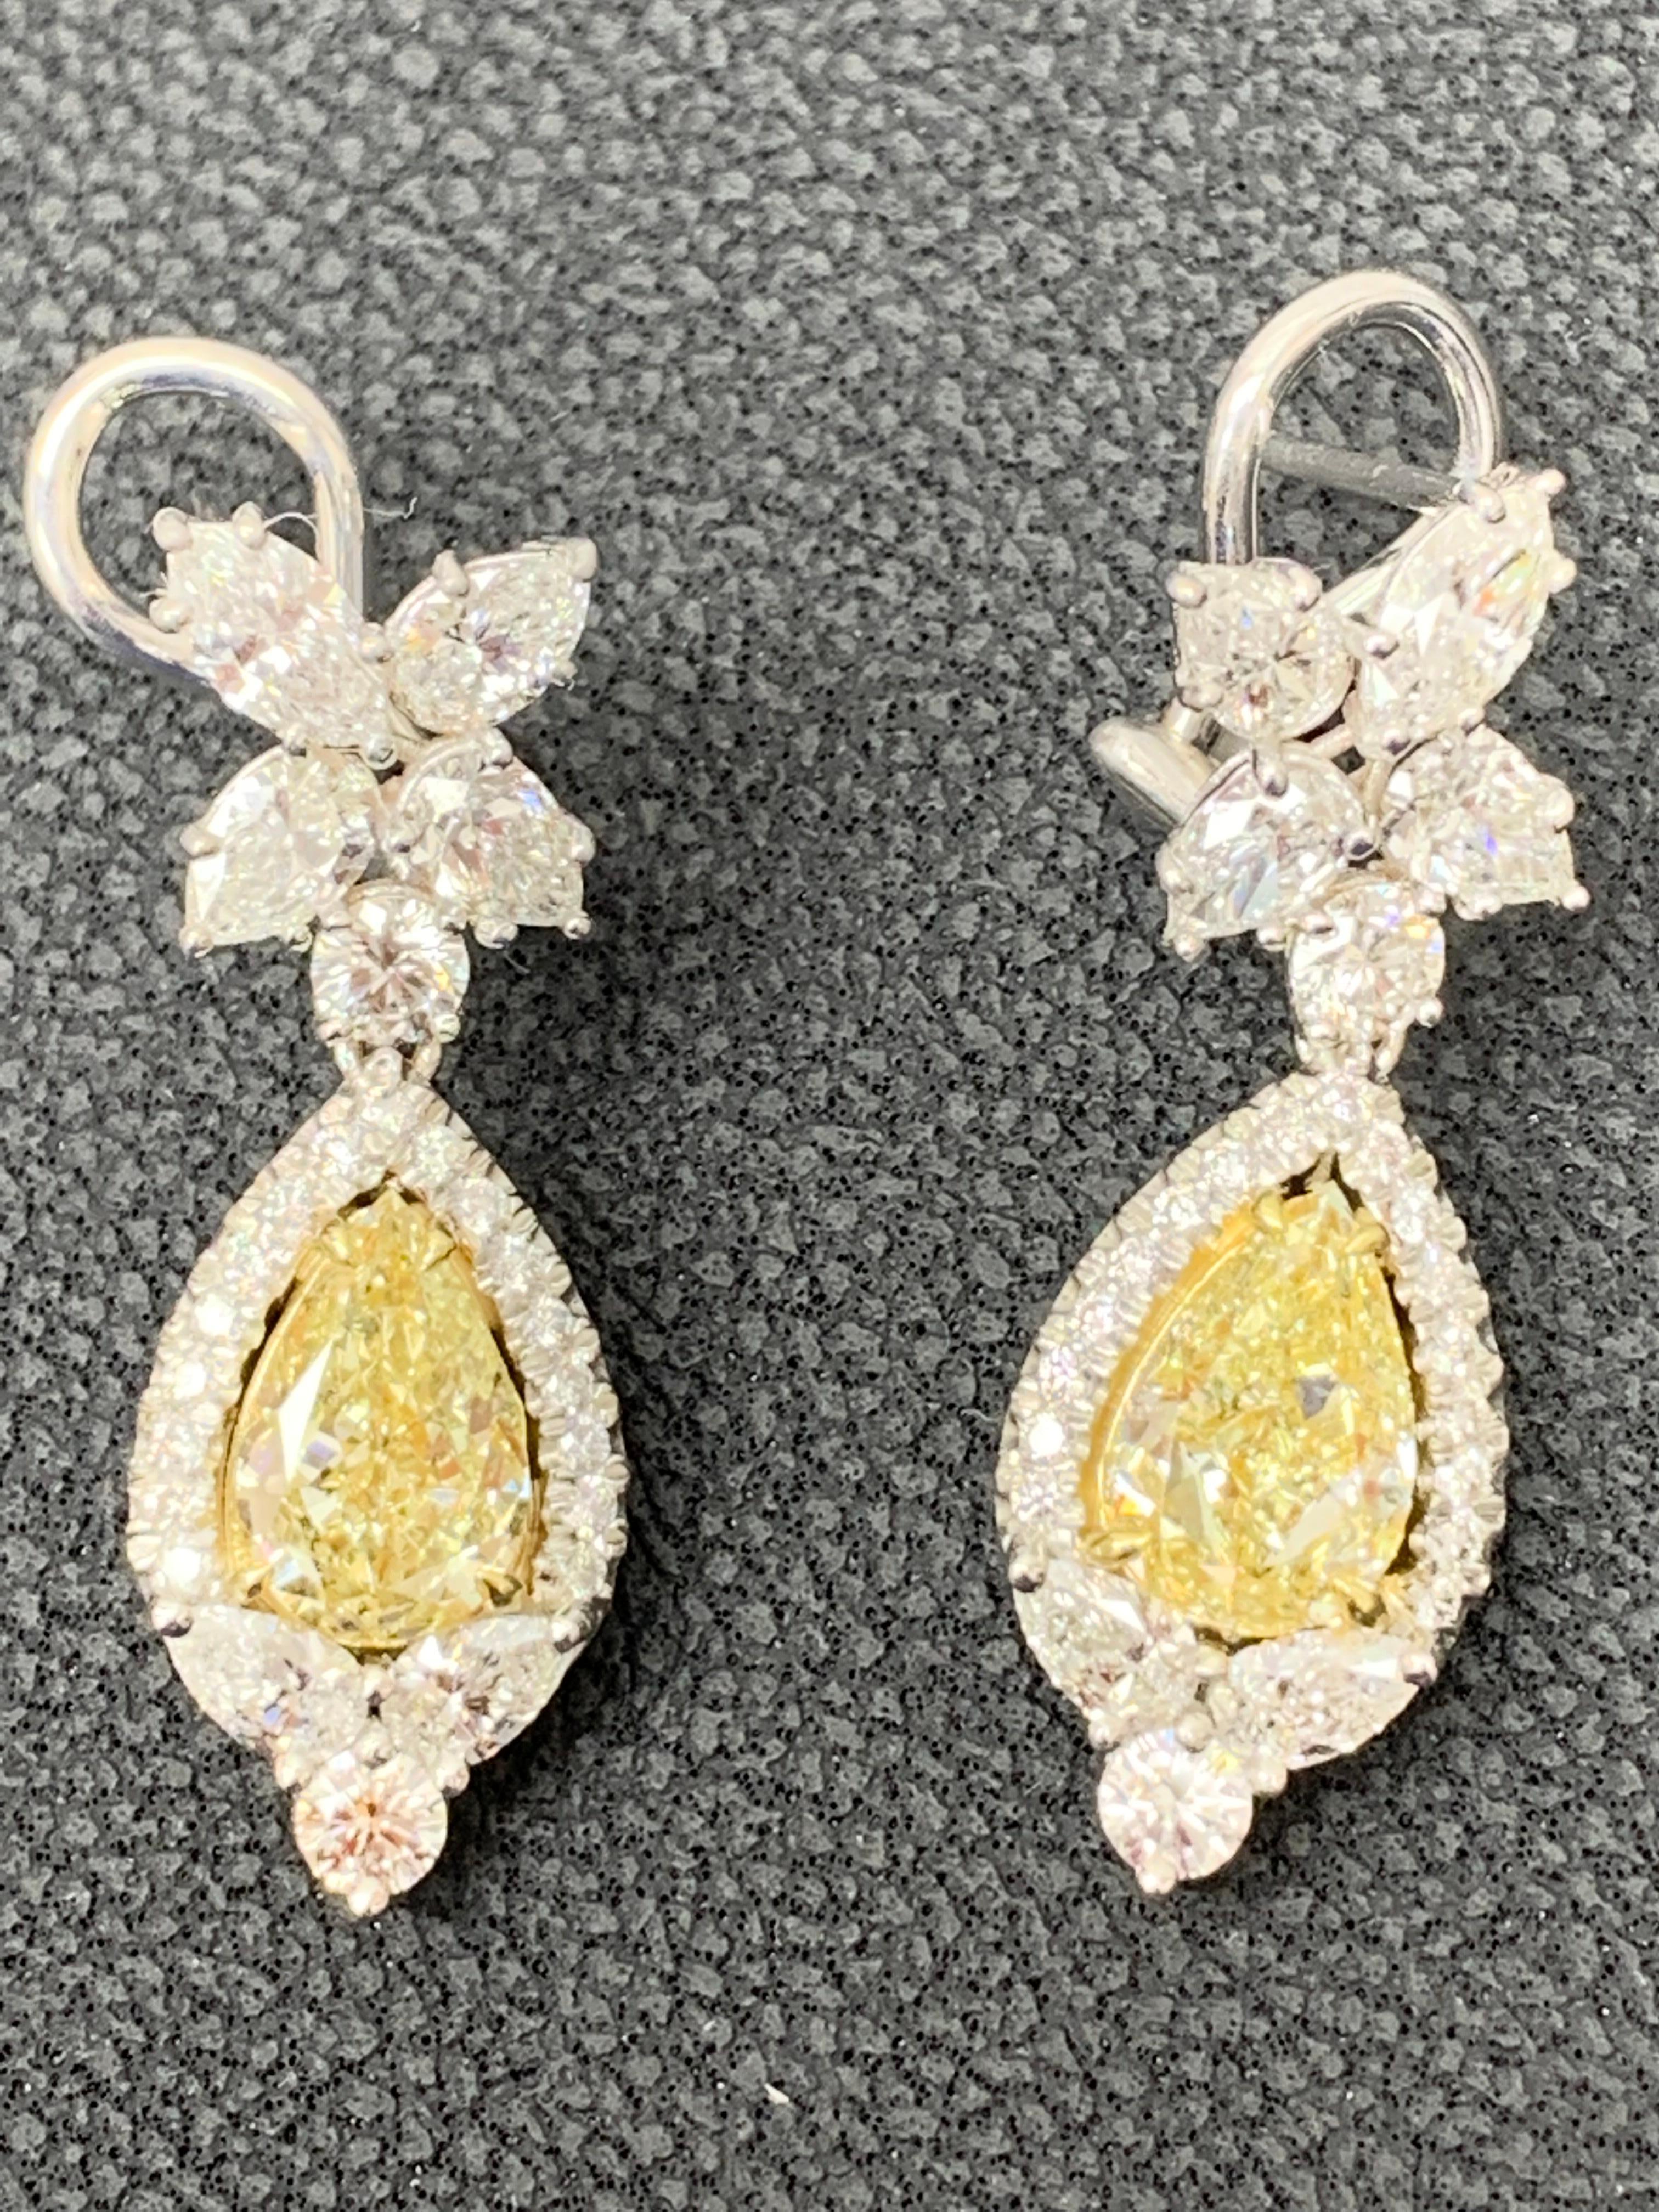 Contemporary 3.79 Carat Fancy Yellow Diamond and Diamond Drop Earrings in 18K White Gold For Sale